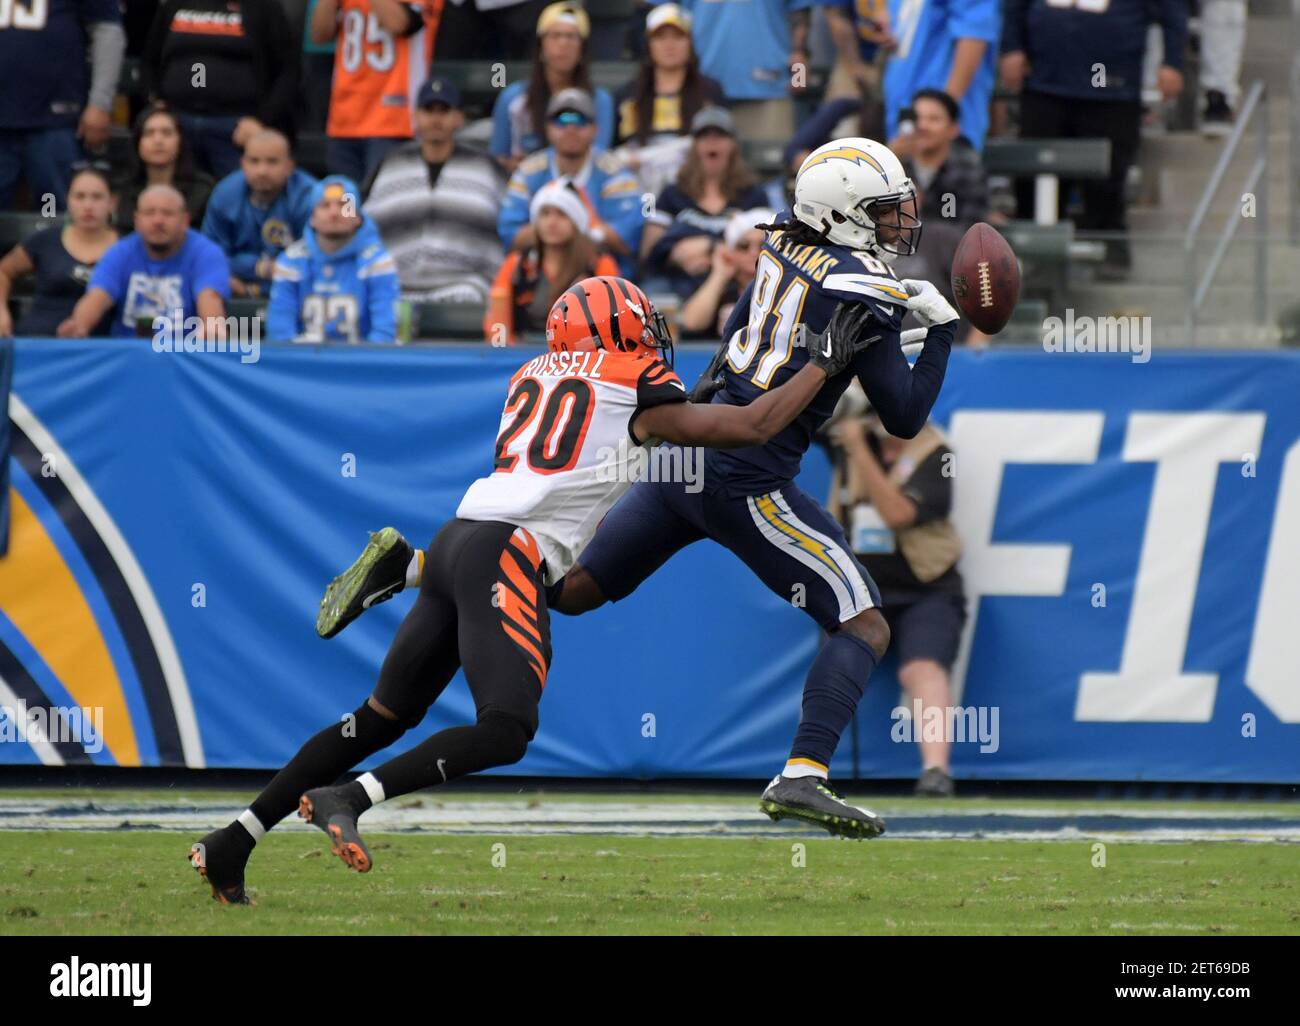 Dec 9, 2018; Carson, CA, USA; Los Angeles Chargers wide receiver Mike Williams (81) attempts to catch a pass in the thrid quarter as Cincinnati Bengals cornerback KeiVarae Russell (20) defends at StubHub Center. The Chargers defeated the Bengals 26-21. Mandatory Credit: Kirby Lee-USA TODAY Sports/Sipa USA Stock Photo